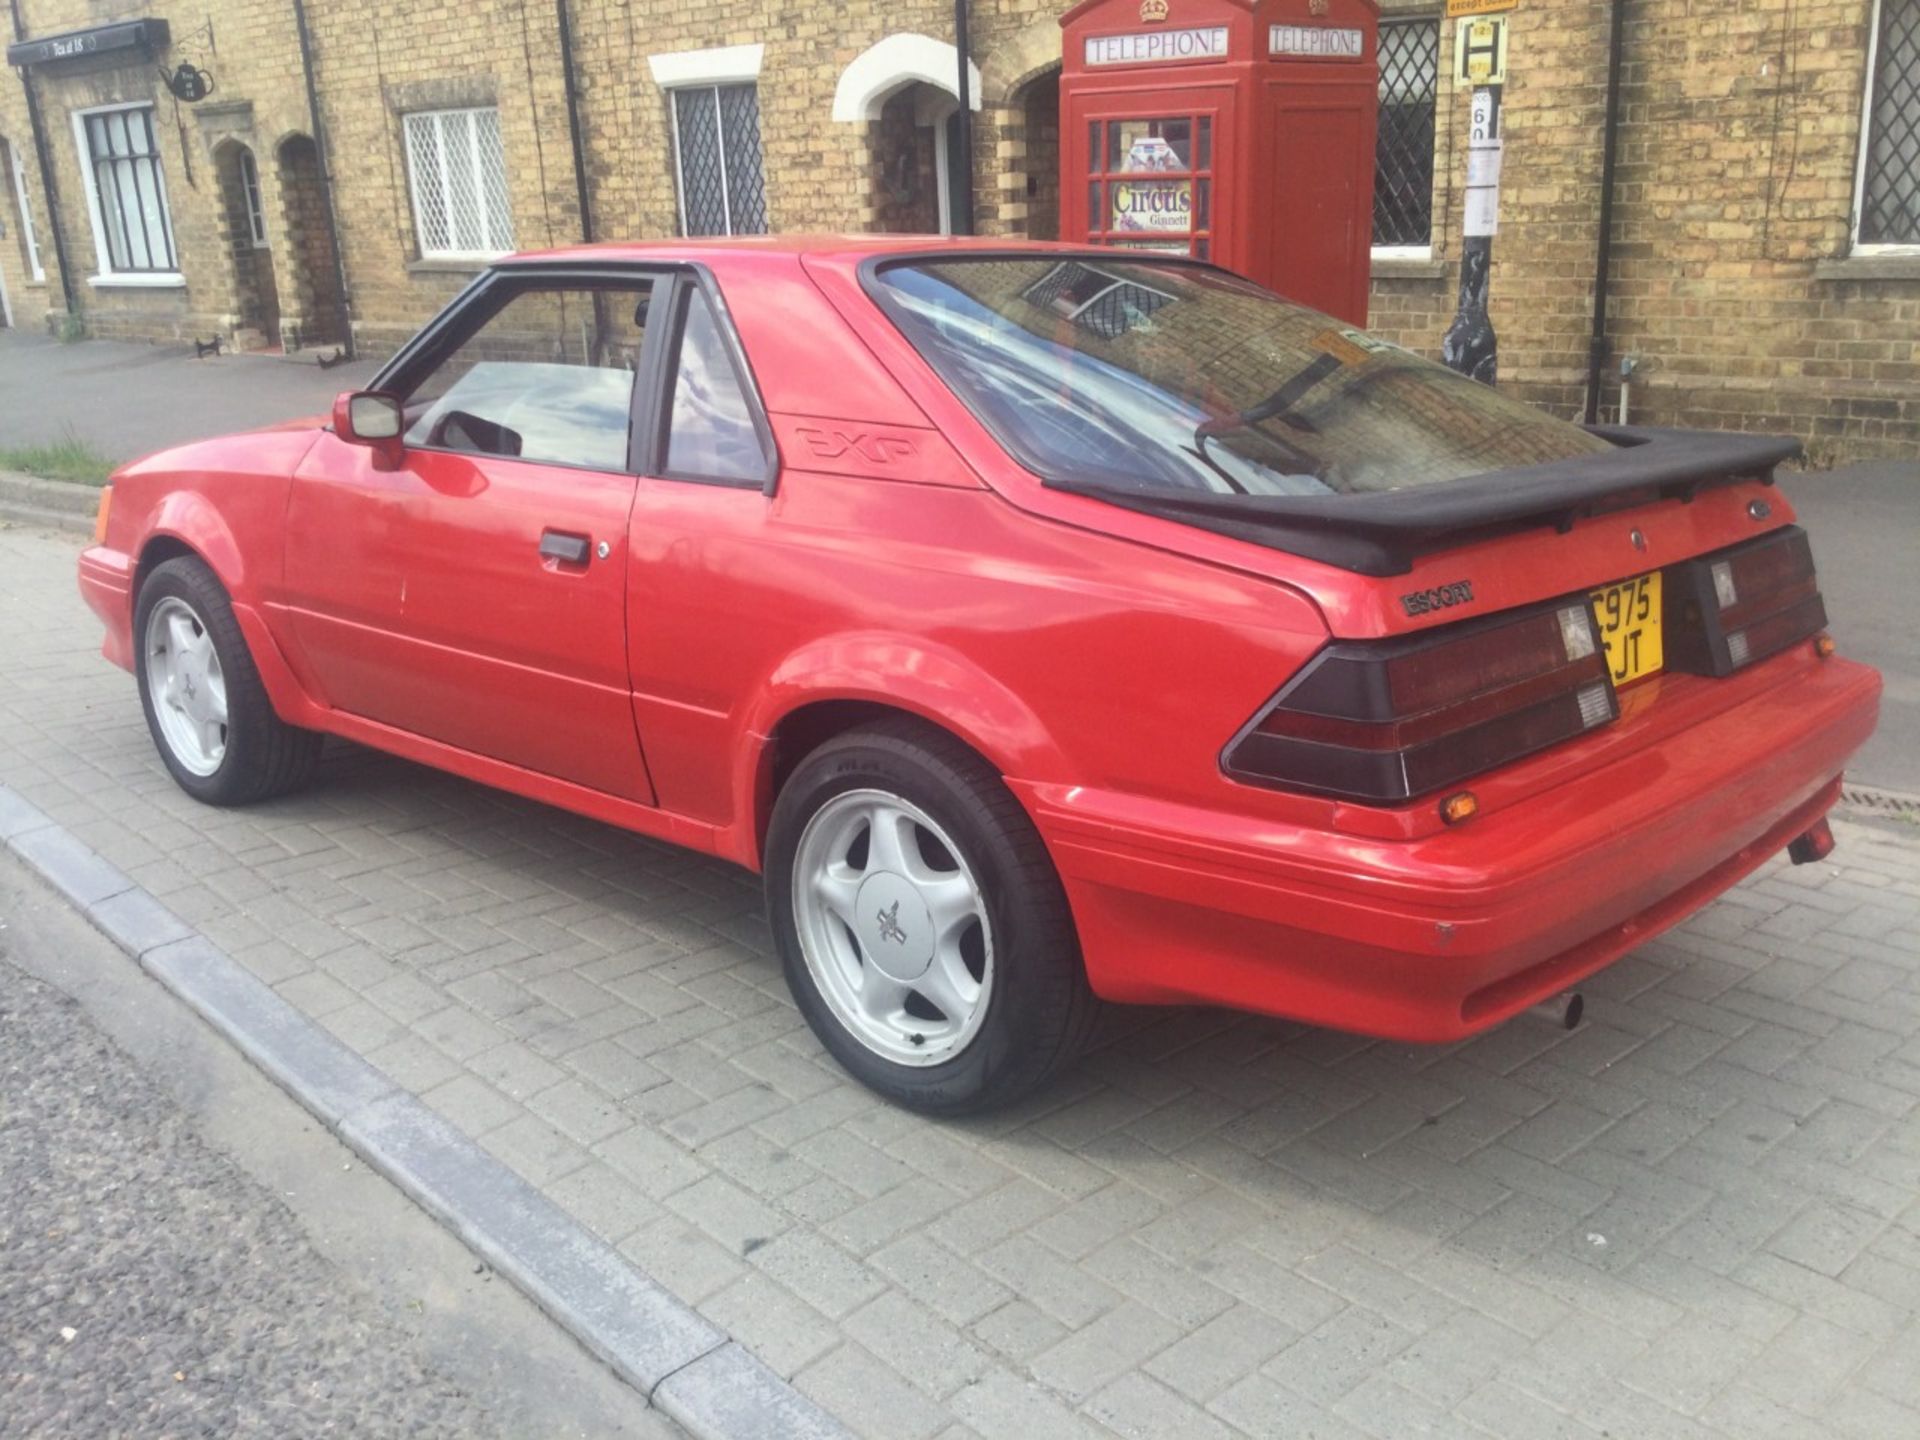 1986 Ford Escort 1.6 EXP Sports Coupe Auto LHD - Image 2 of 4